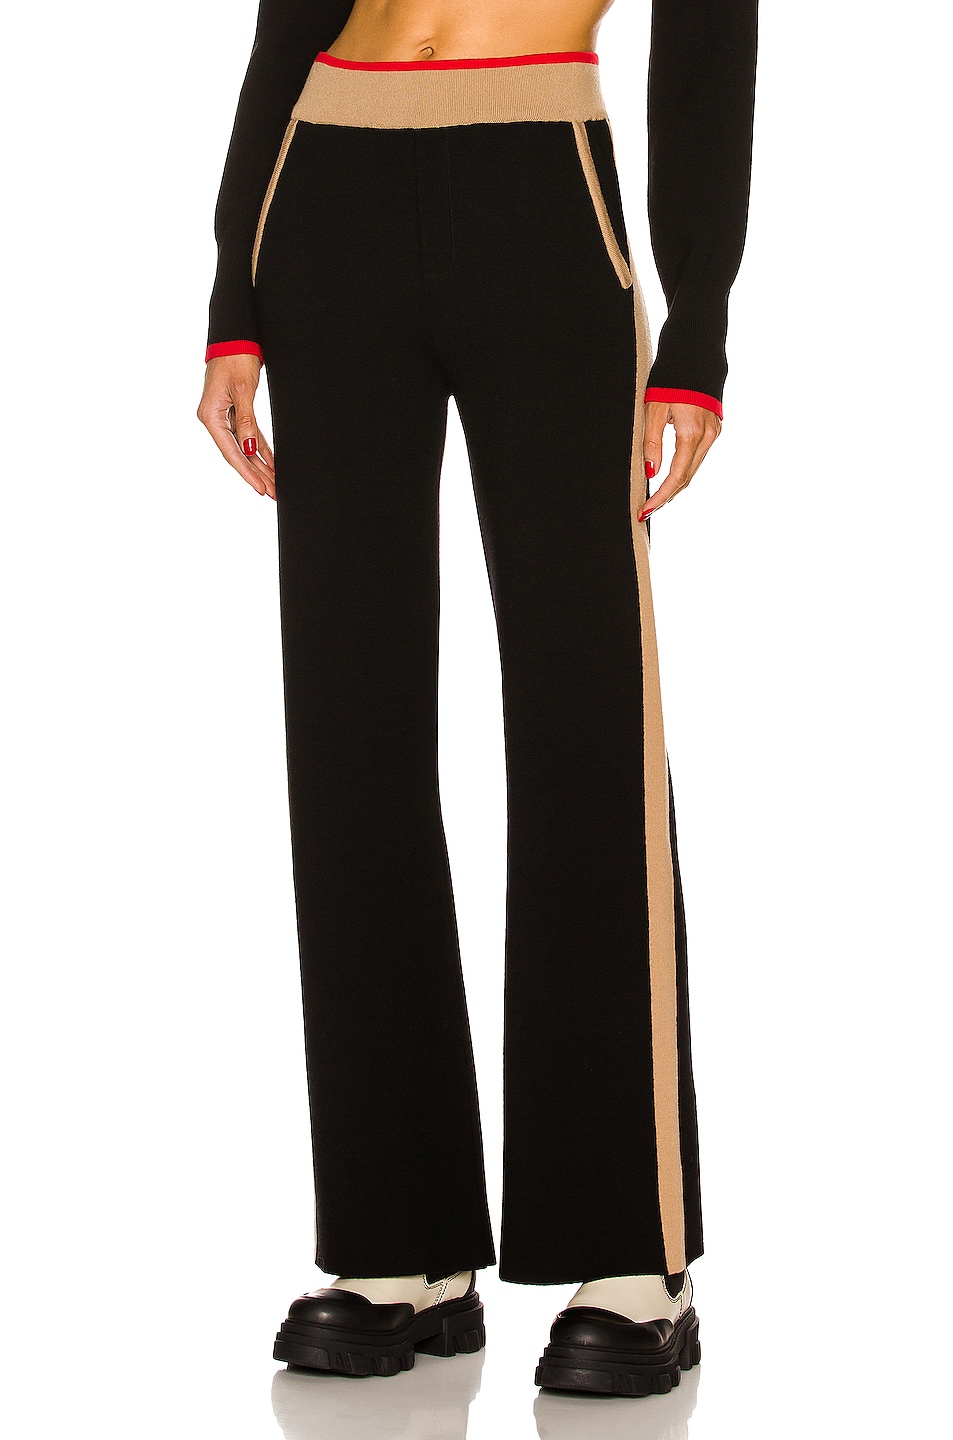 Image 1 of CORDOVA The Apres Sport Pant in Onyx, Latte & Fiery Red